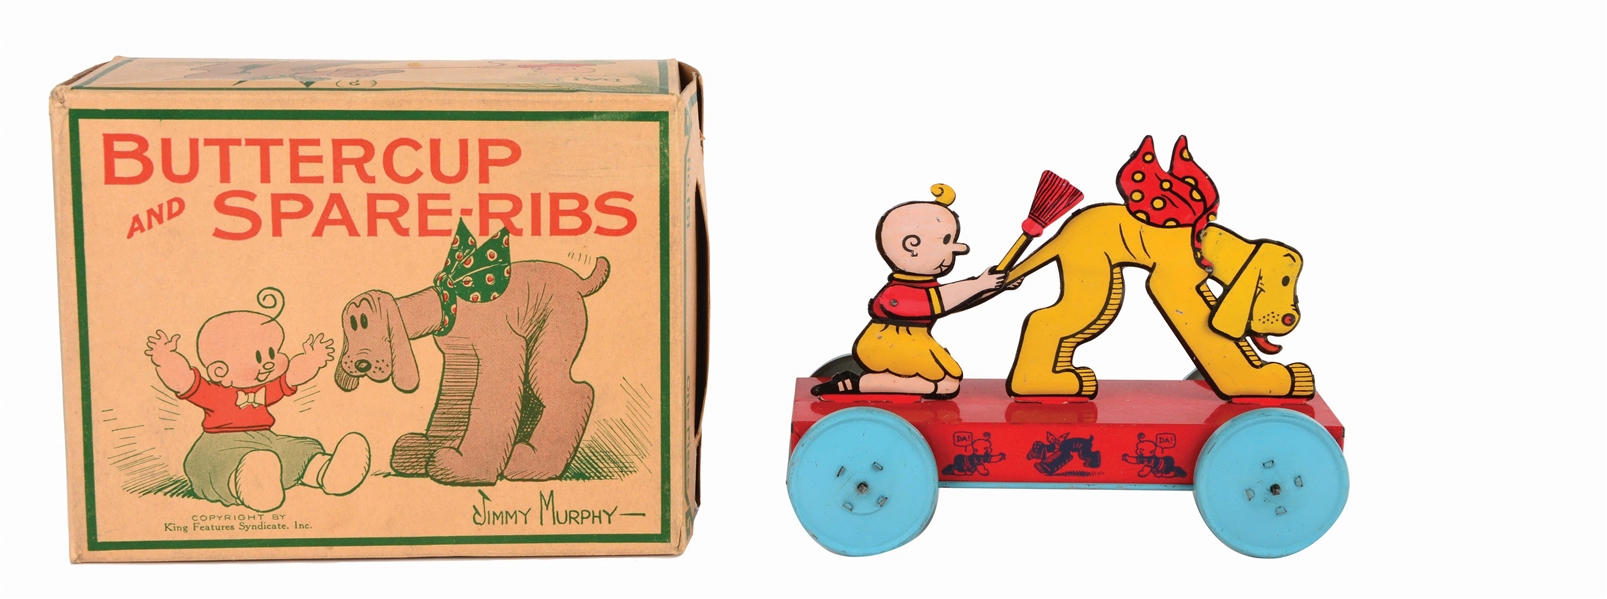 NIFTY TIN-LITHO BUTTERCUP AND SPARE-RIBS FLOOR TOY WITH EXTREMELY RARE ORIGINAL BOX.